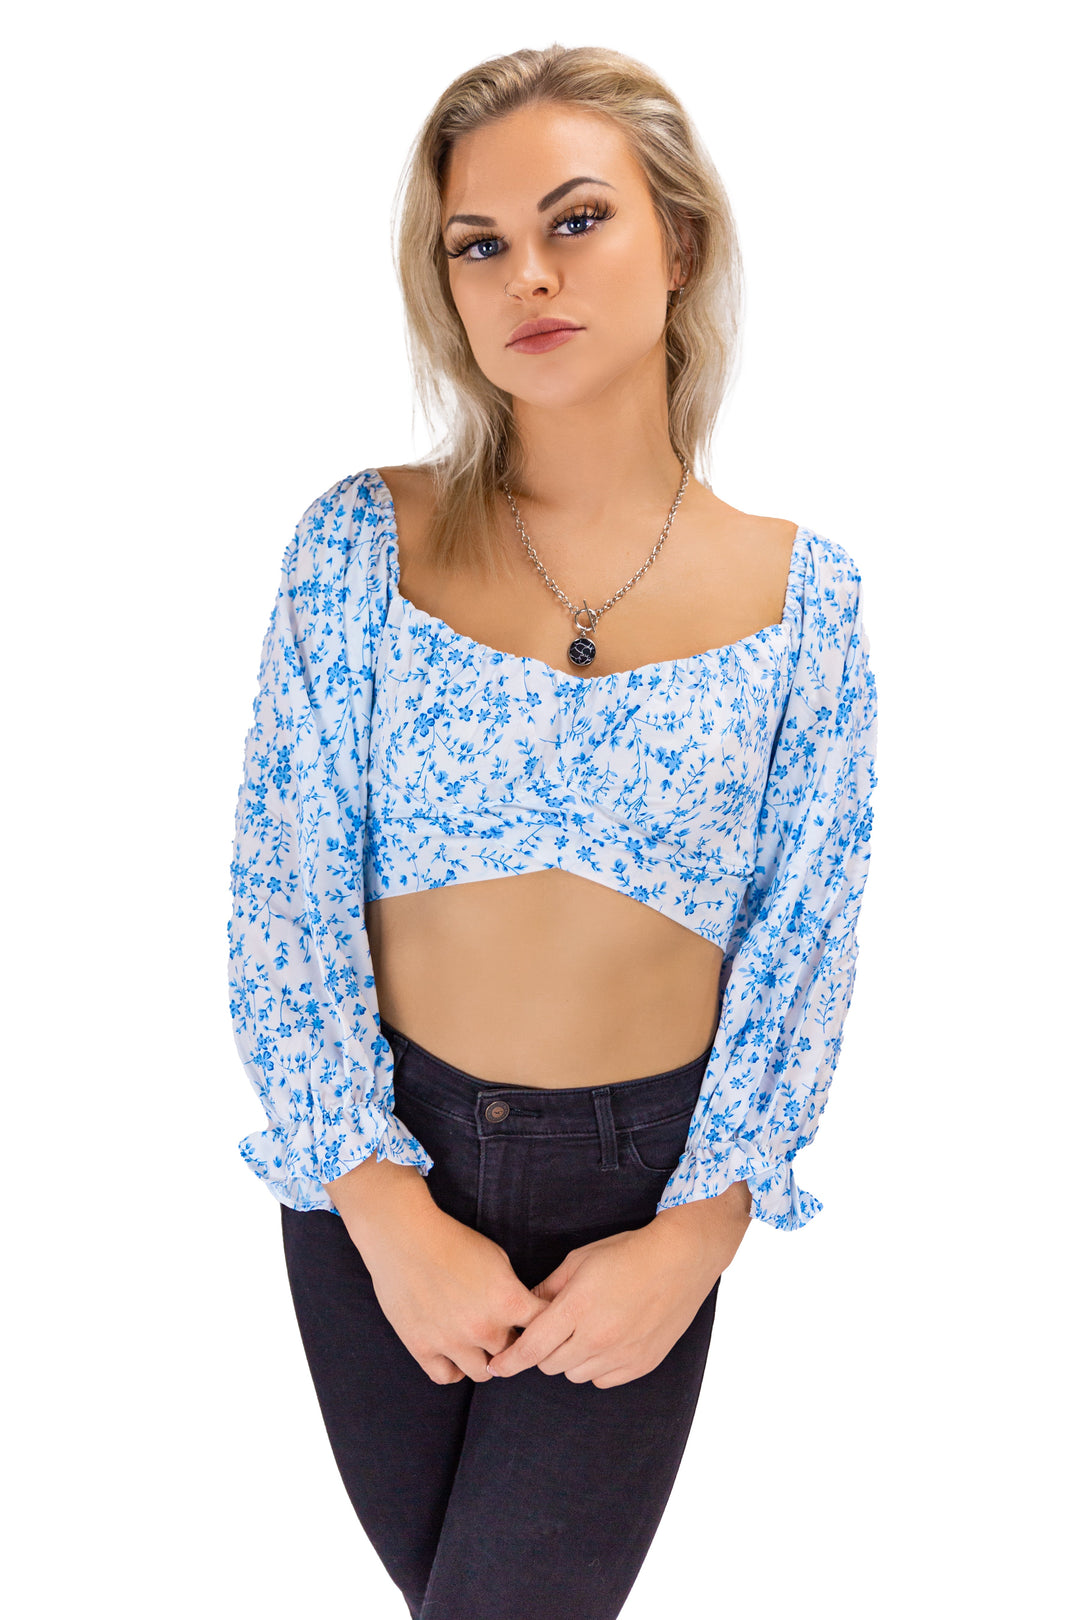 Fabonics Blossoming Elegance Blue and White Floral Puff Sleeve Crop Top